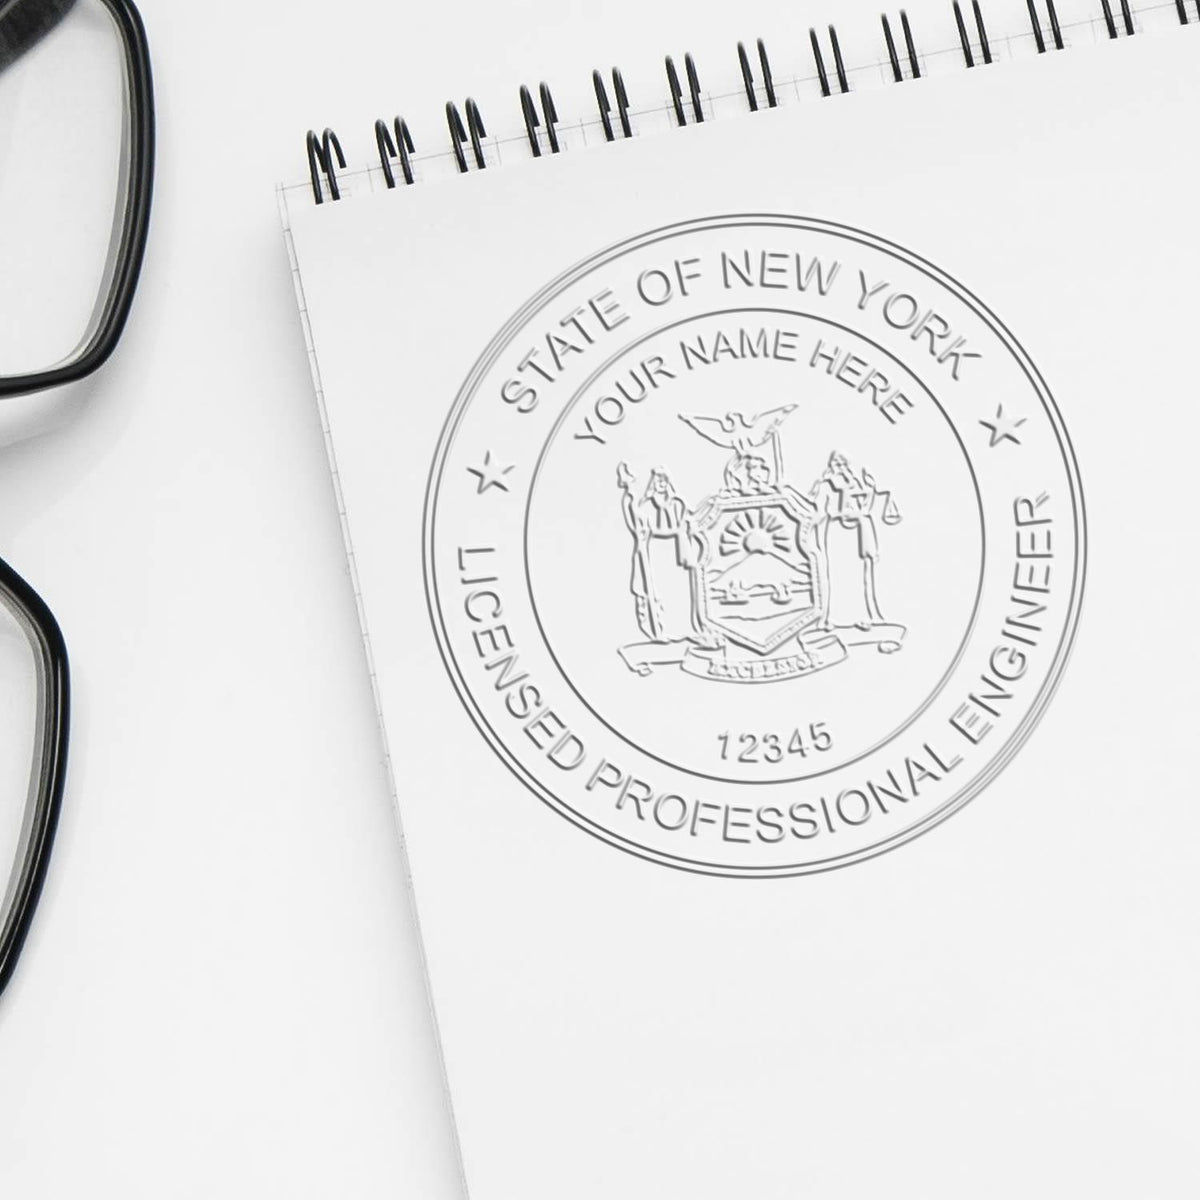 The State of New York Extended Long Reach Engineer Seal stamp impression comes to life with a crisp, detailed photo on paper - showcasing true professional quality.